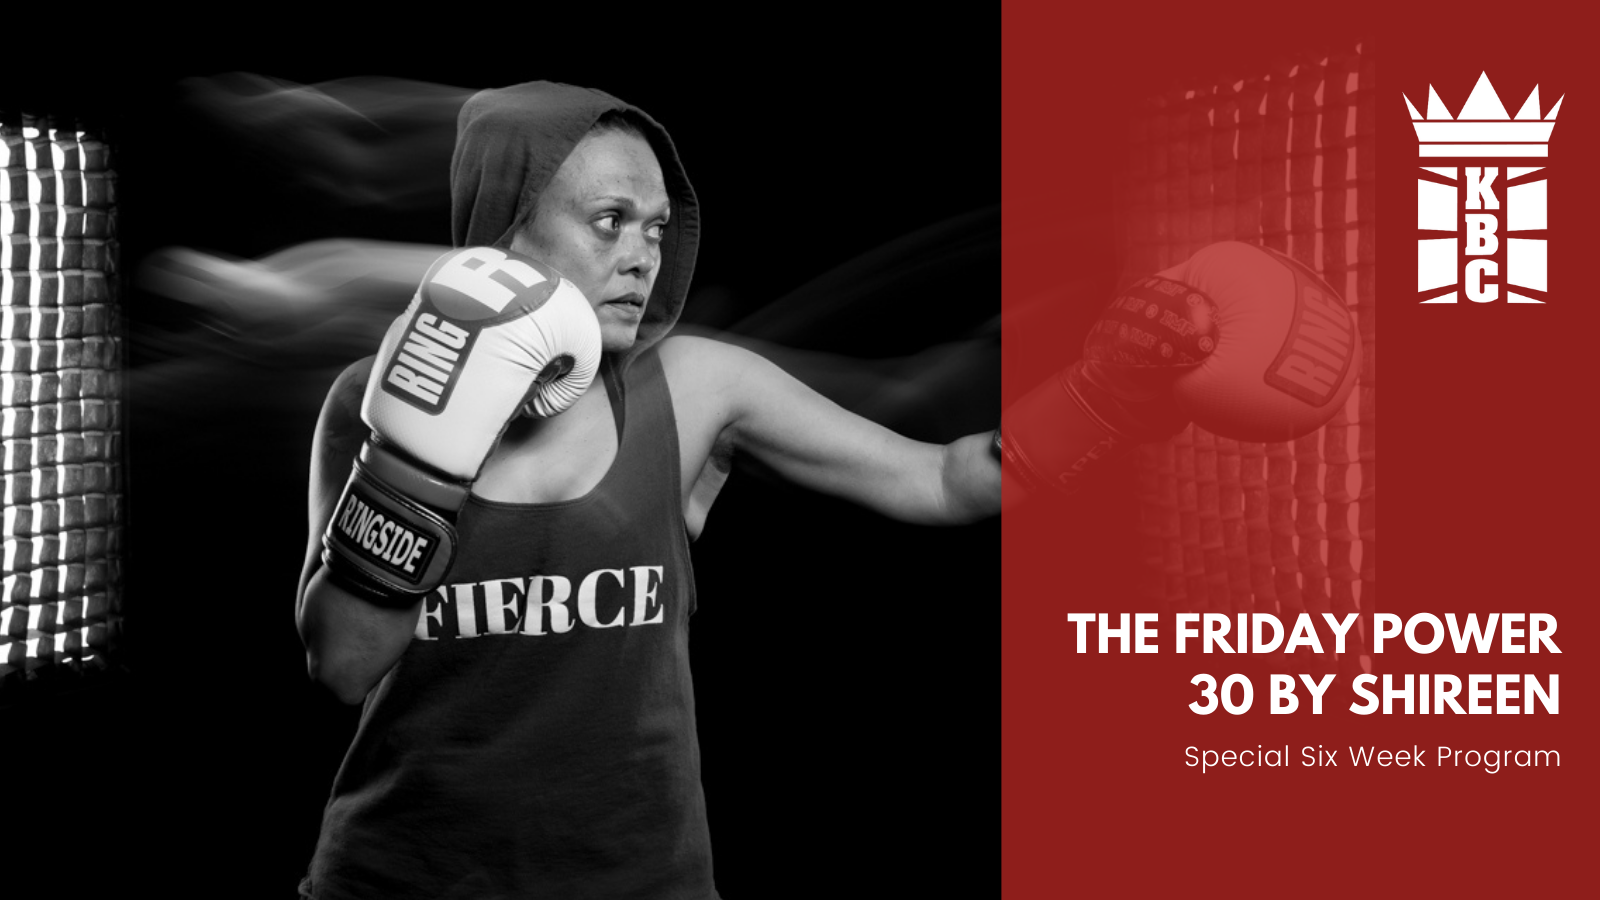 NEW PROGRAM: FRIDAY POWER 30 – Boxing Inspired, Full Body Strength & Conditioning by Shireen!